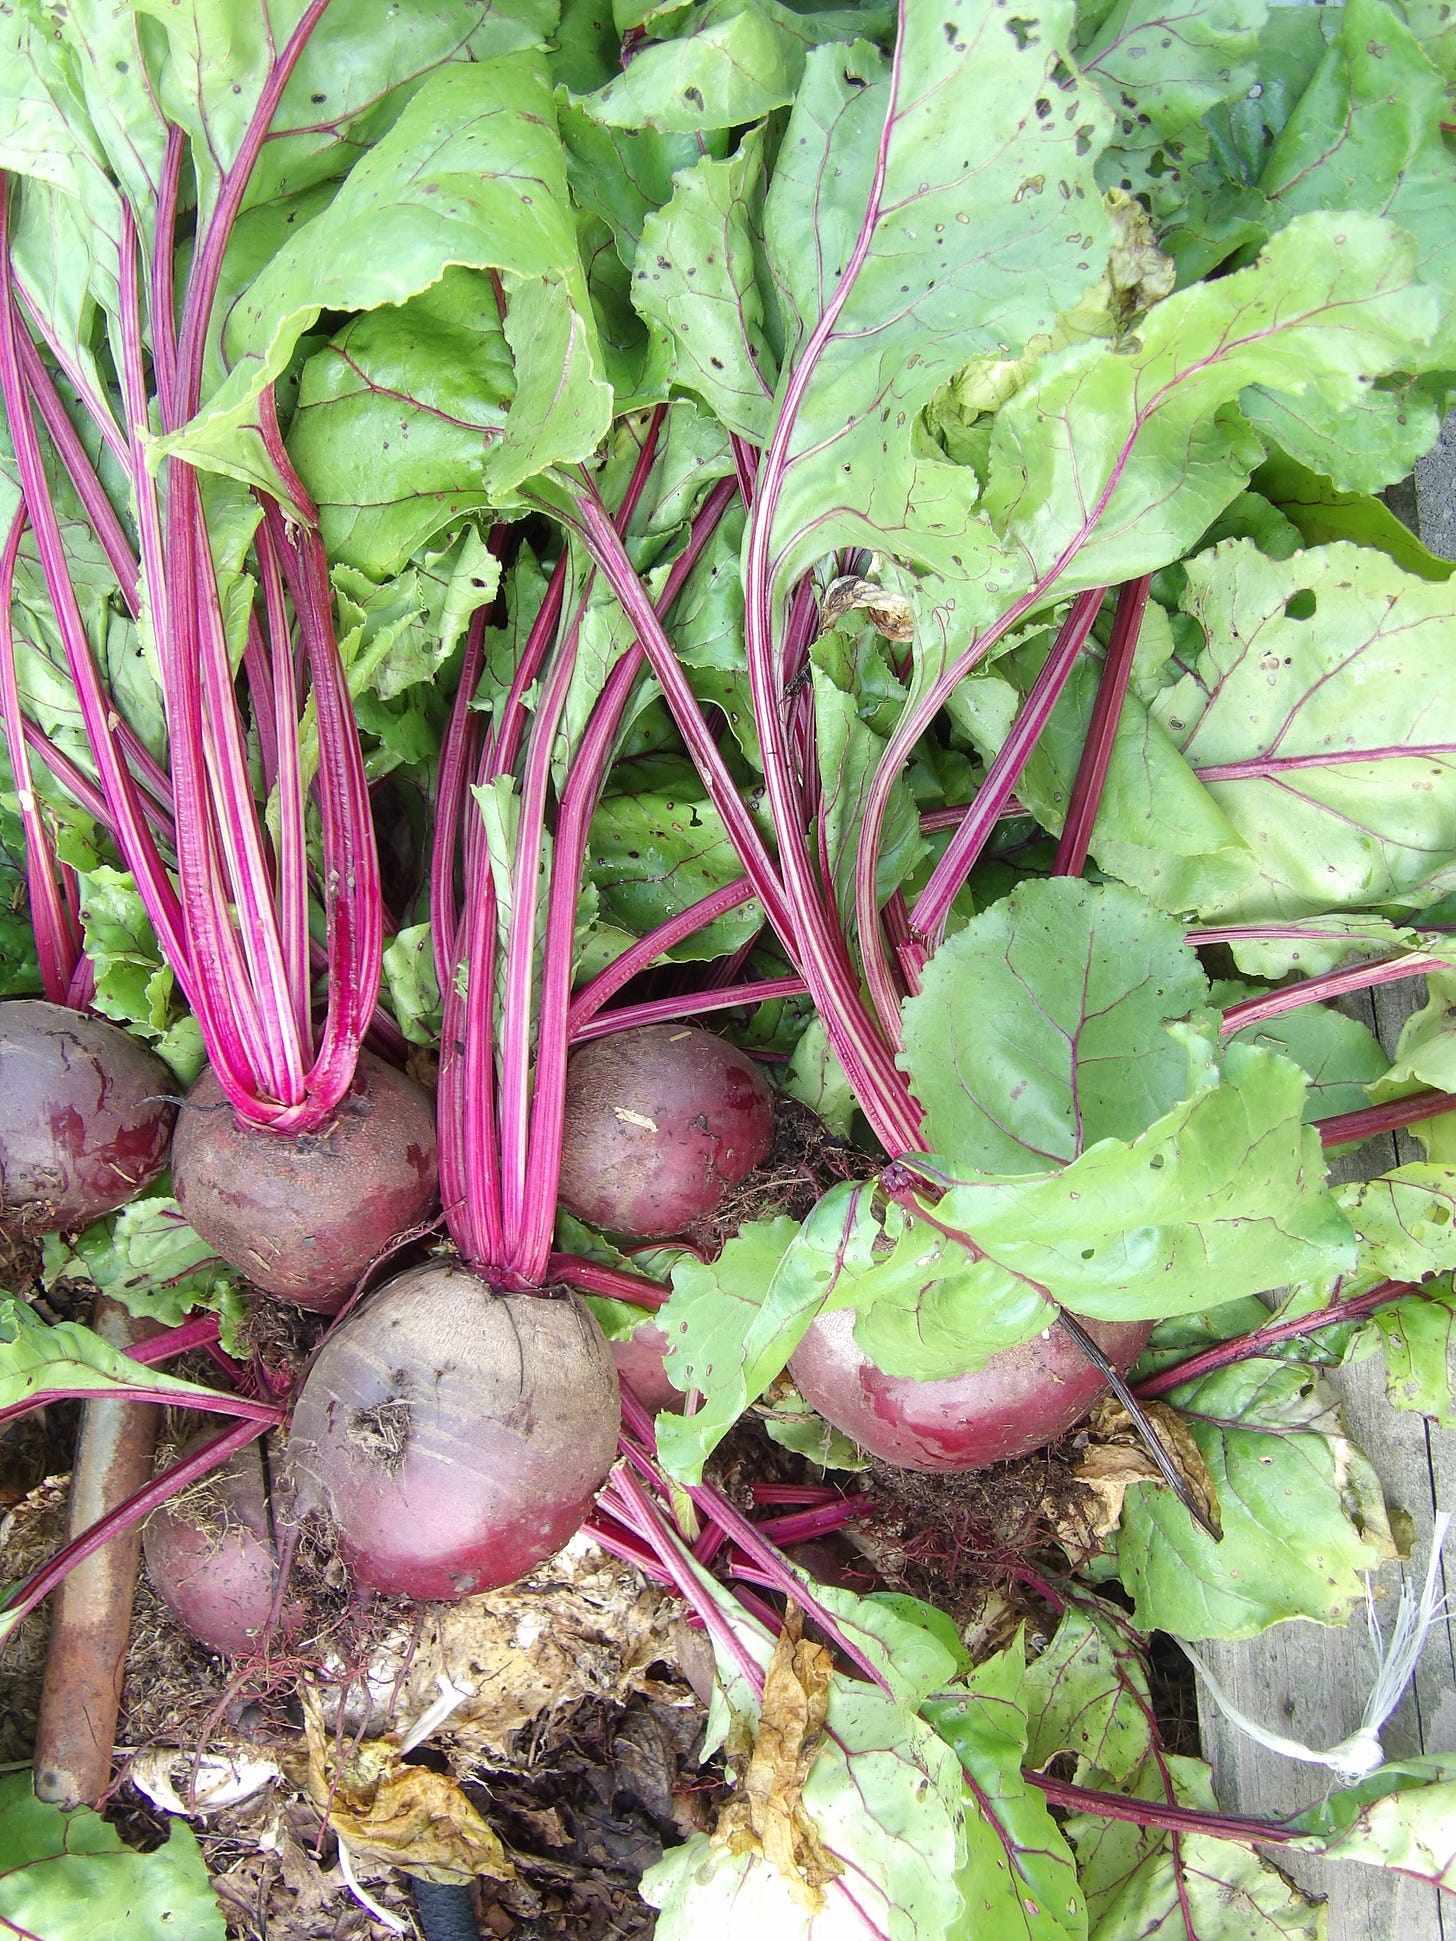 Beets Ready to Harvest